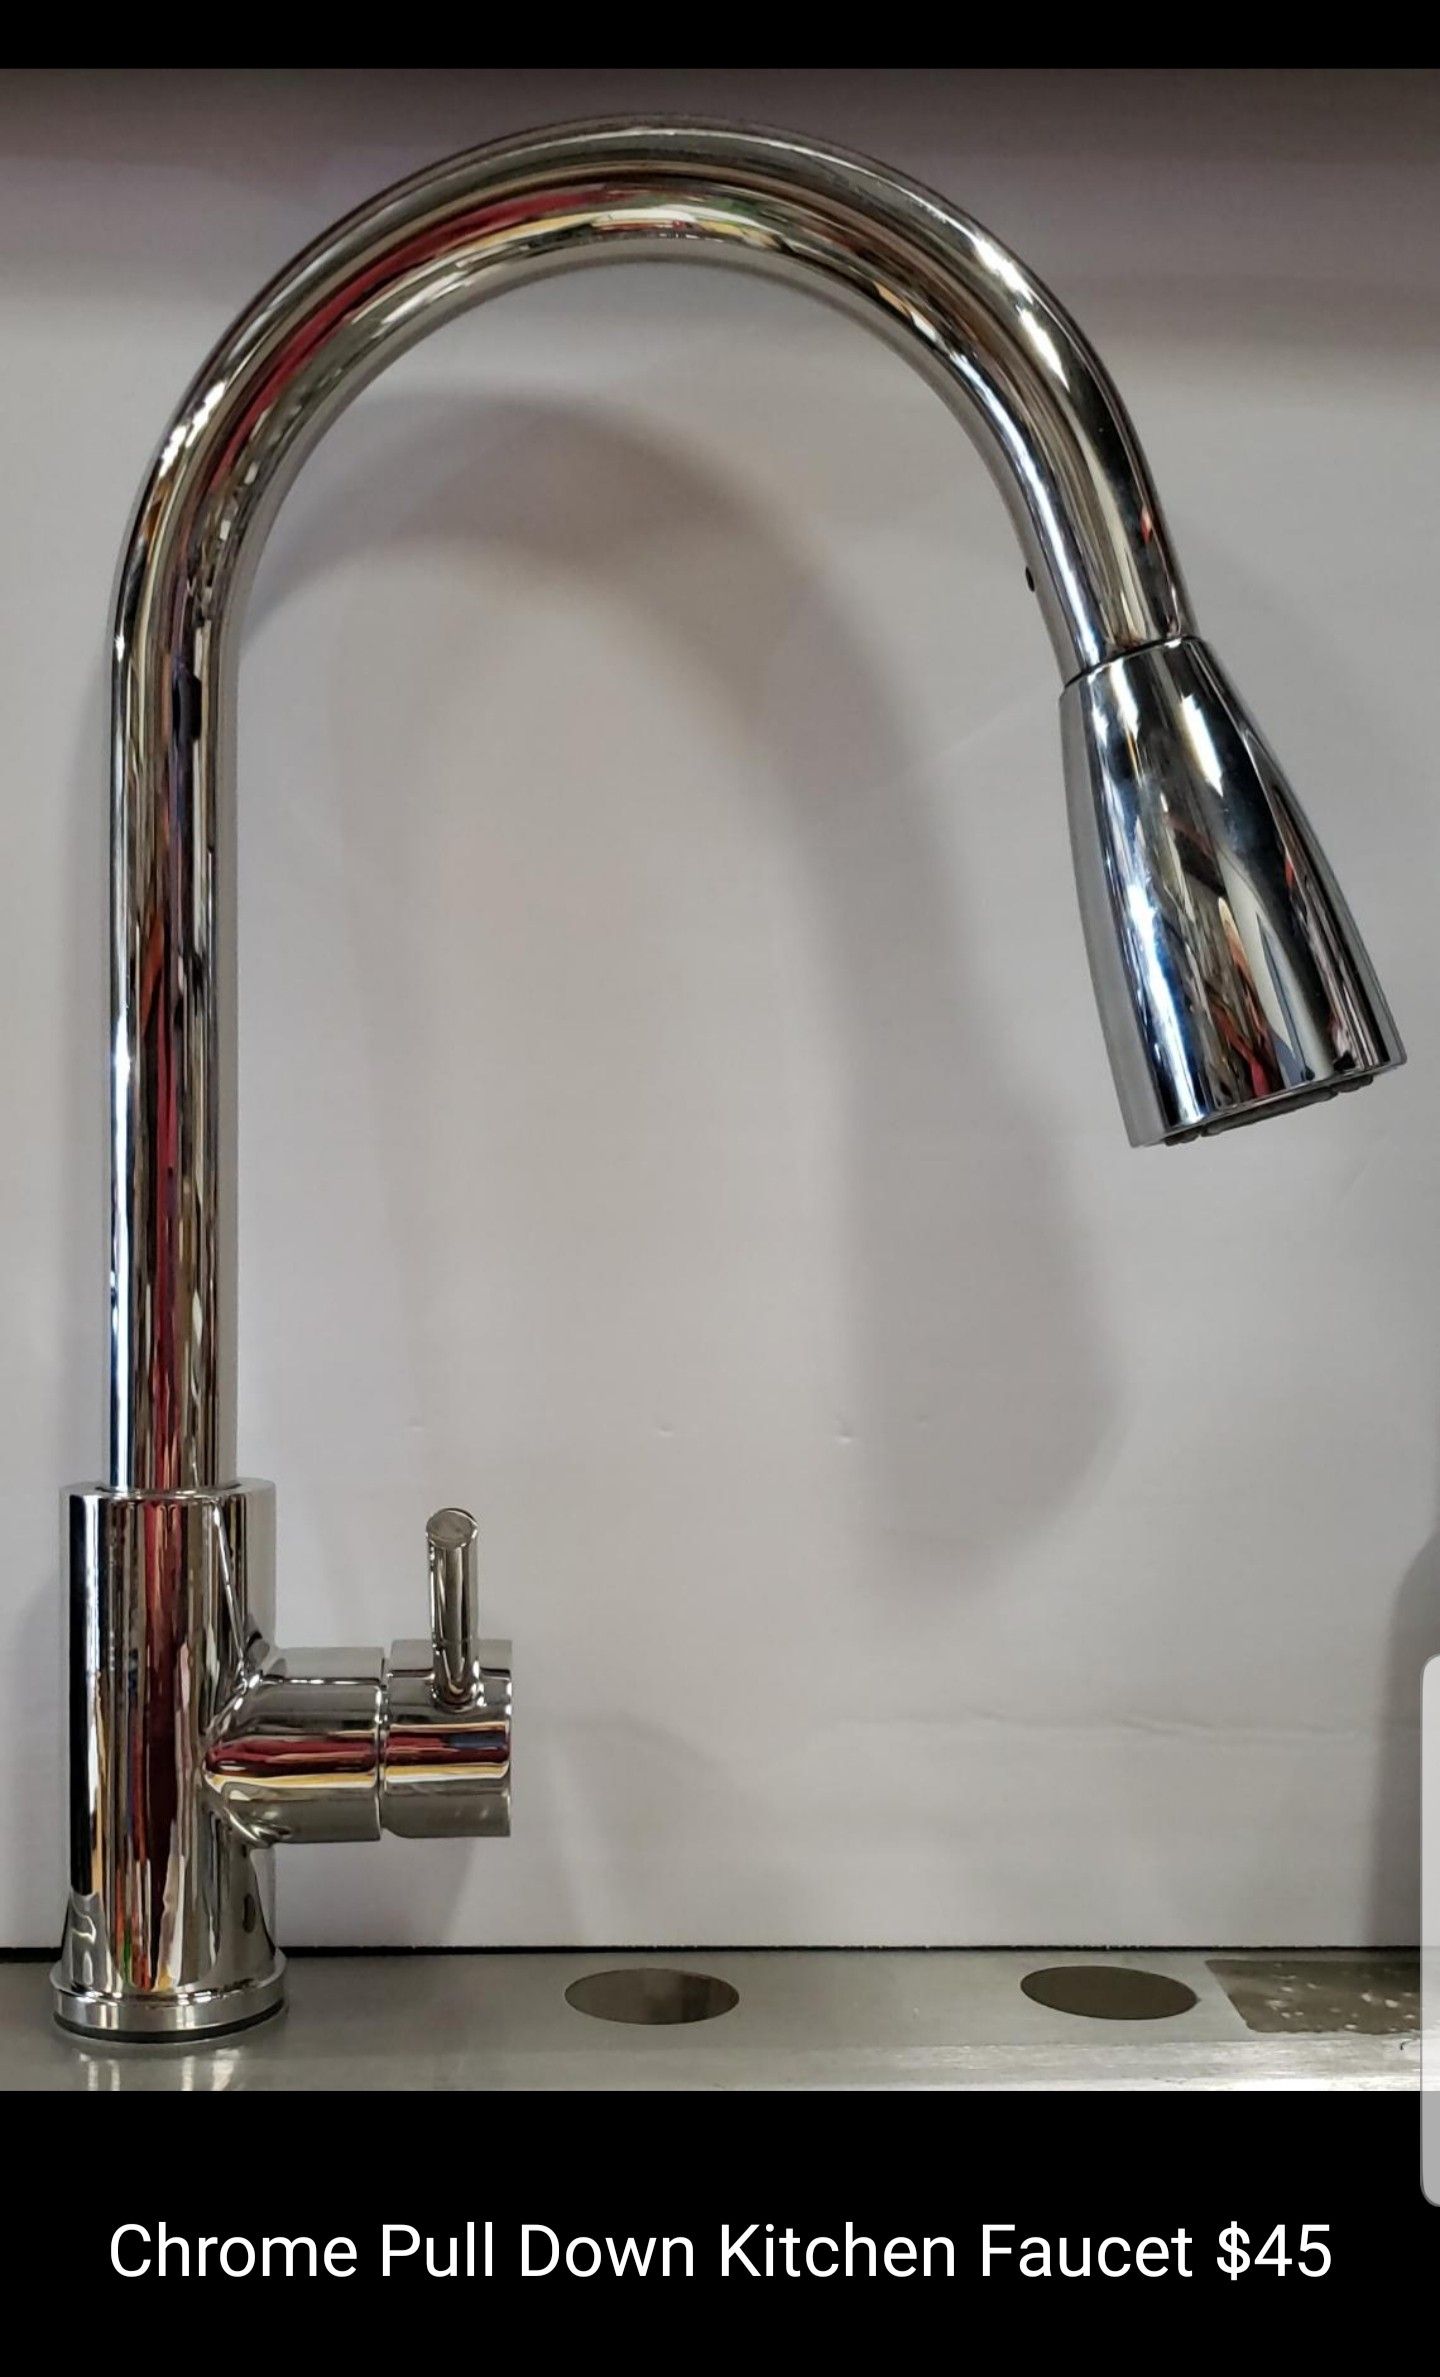 Pull down kitchen faucet chrome